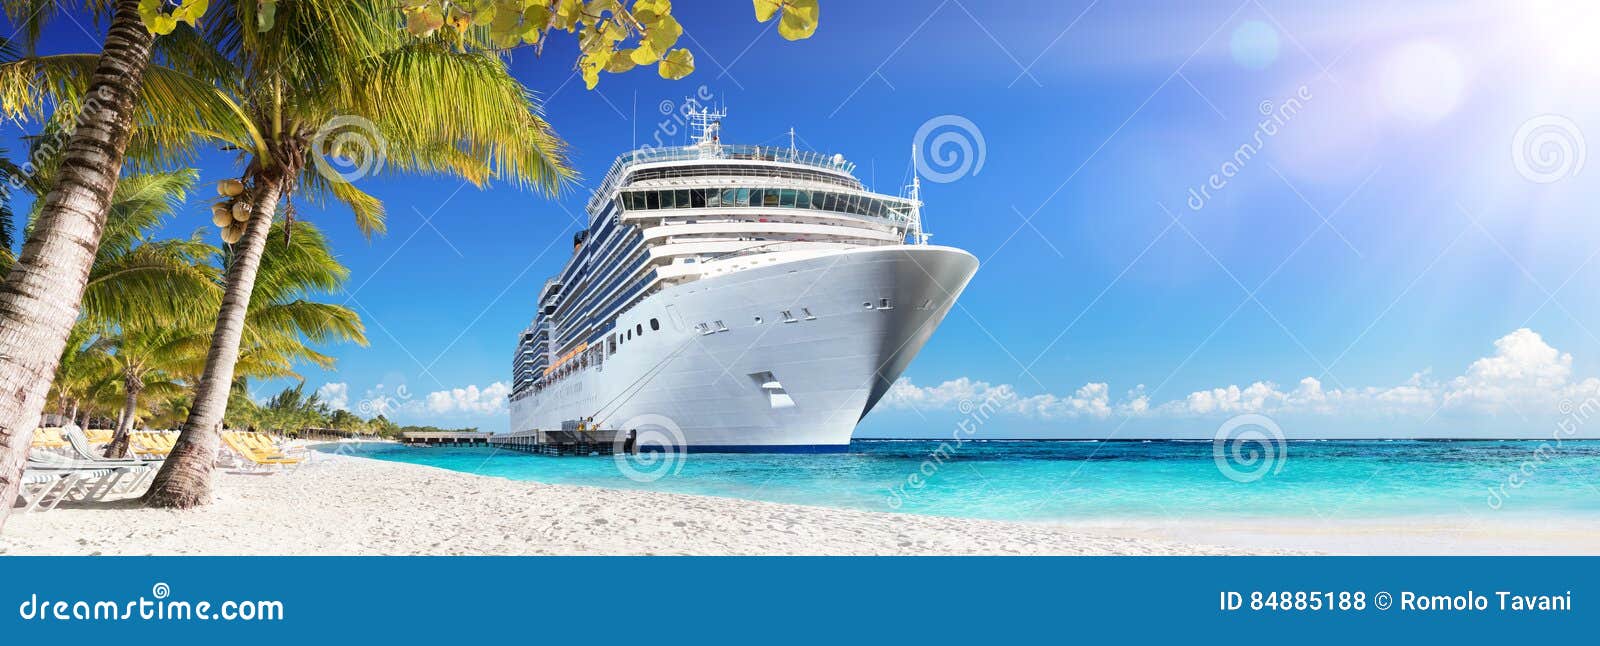 cruise to caribbean with palm trees